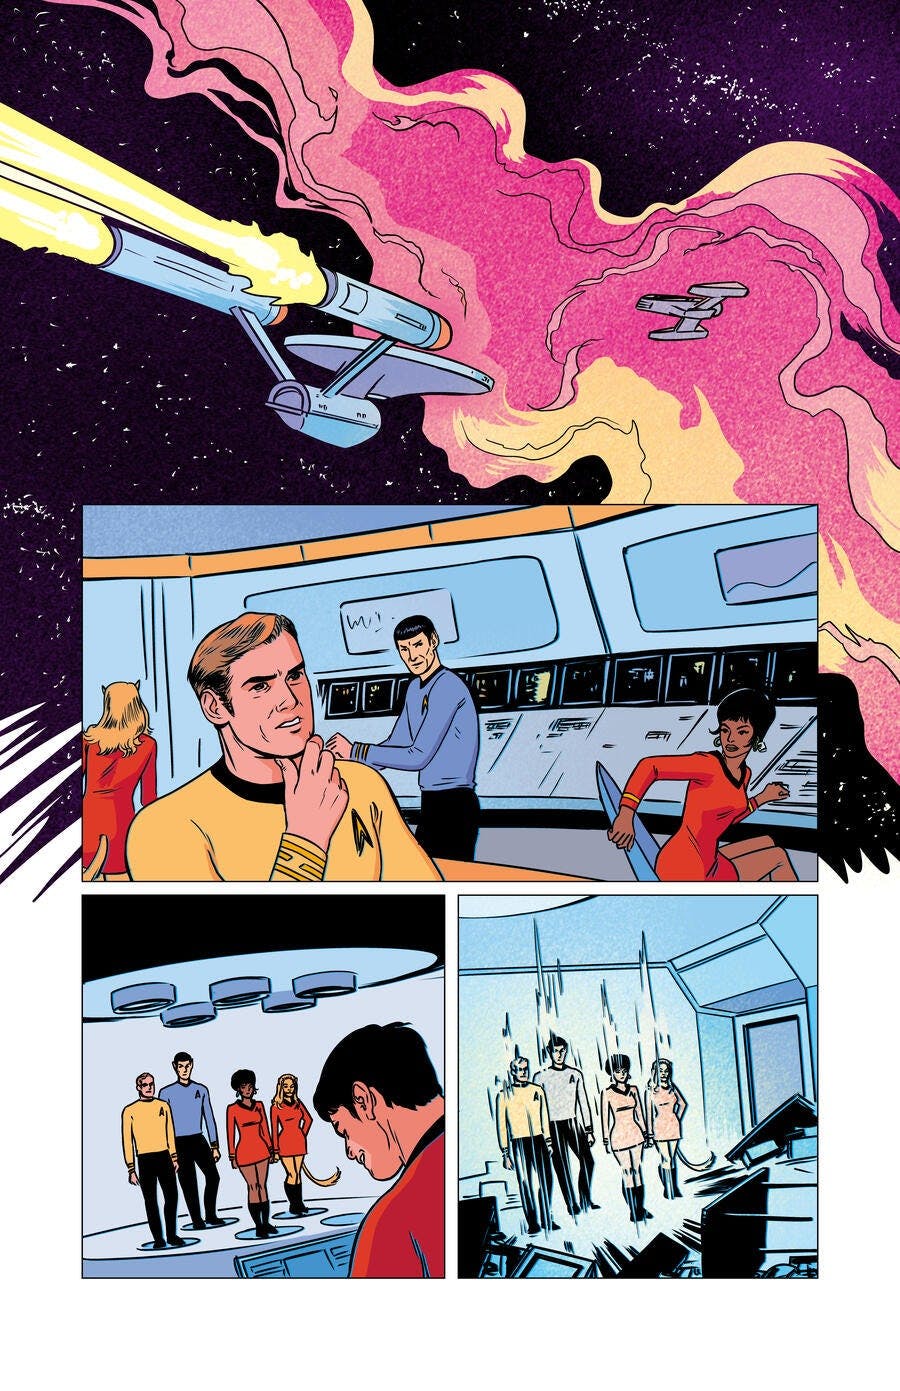 First-look Images of IDW’s Upcoming 'Star Trek: The Animated Celebration Presents The Scheimer Barrier' Comic Book interior art by Jonathan Case